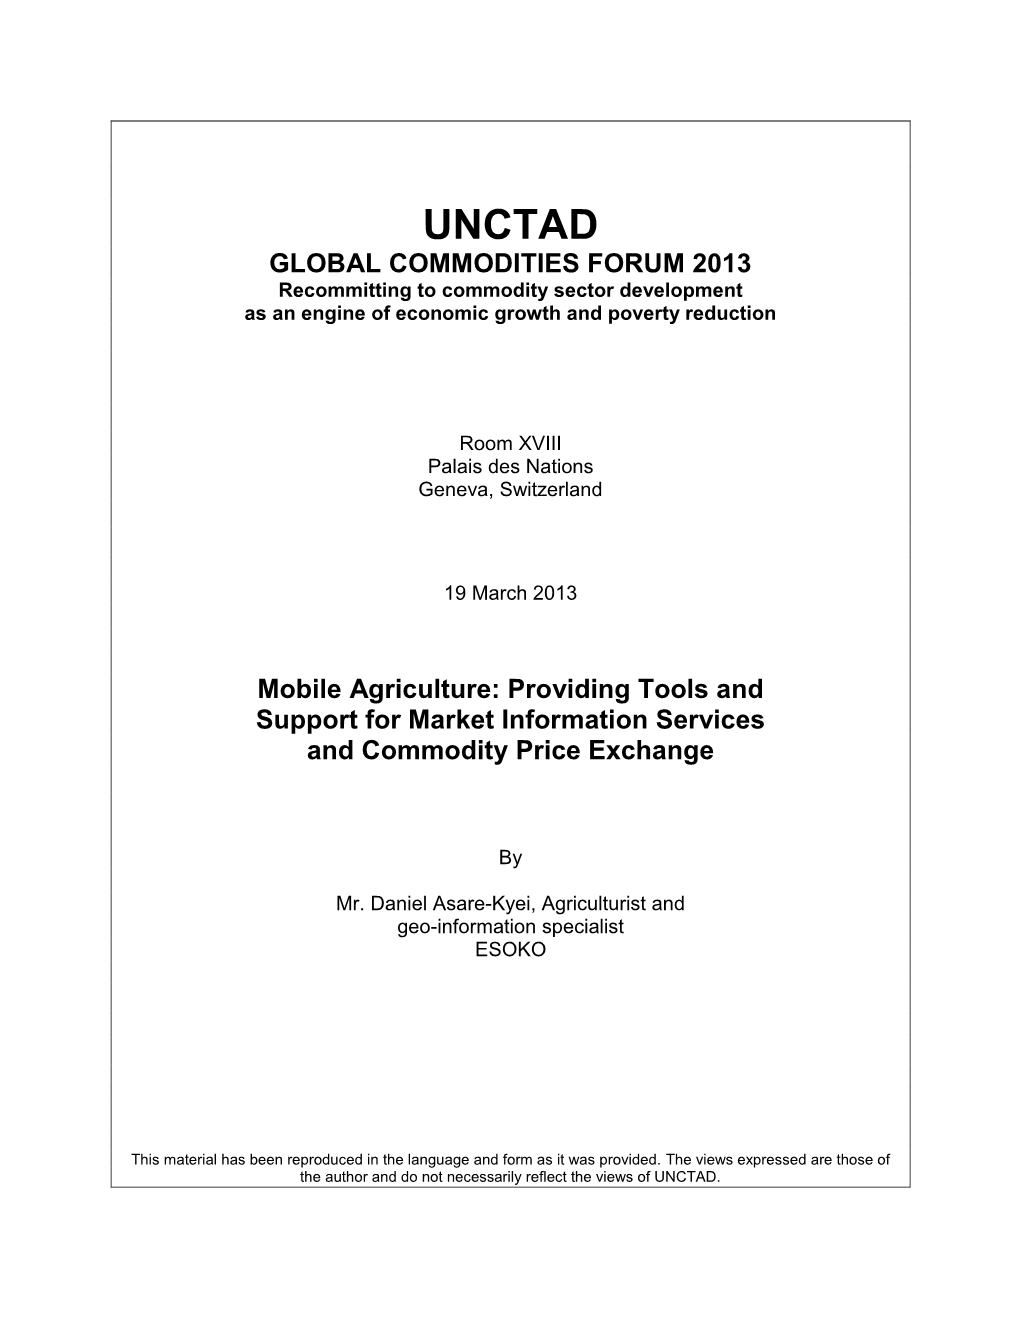 Mobile Agriculture: Providing Tools and Support for Market Information Services and Commodity Price Exchange